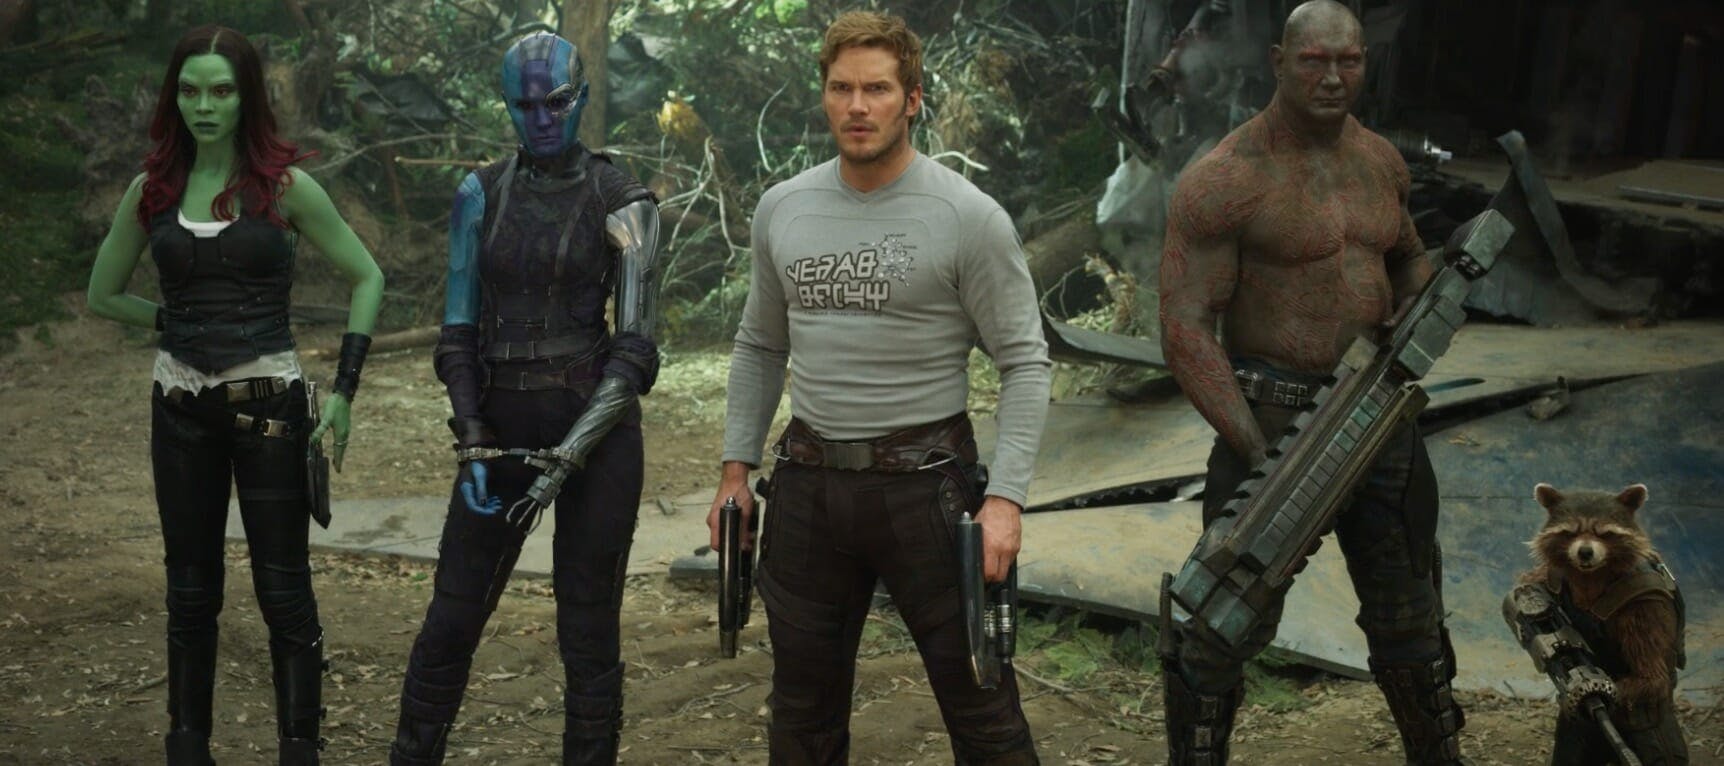 mcu release order - guardians of the galaxy vol 2